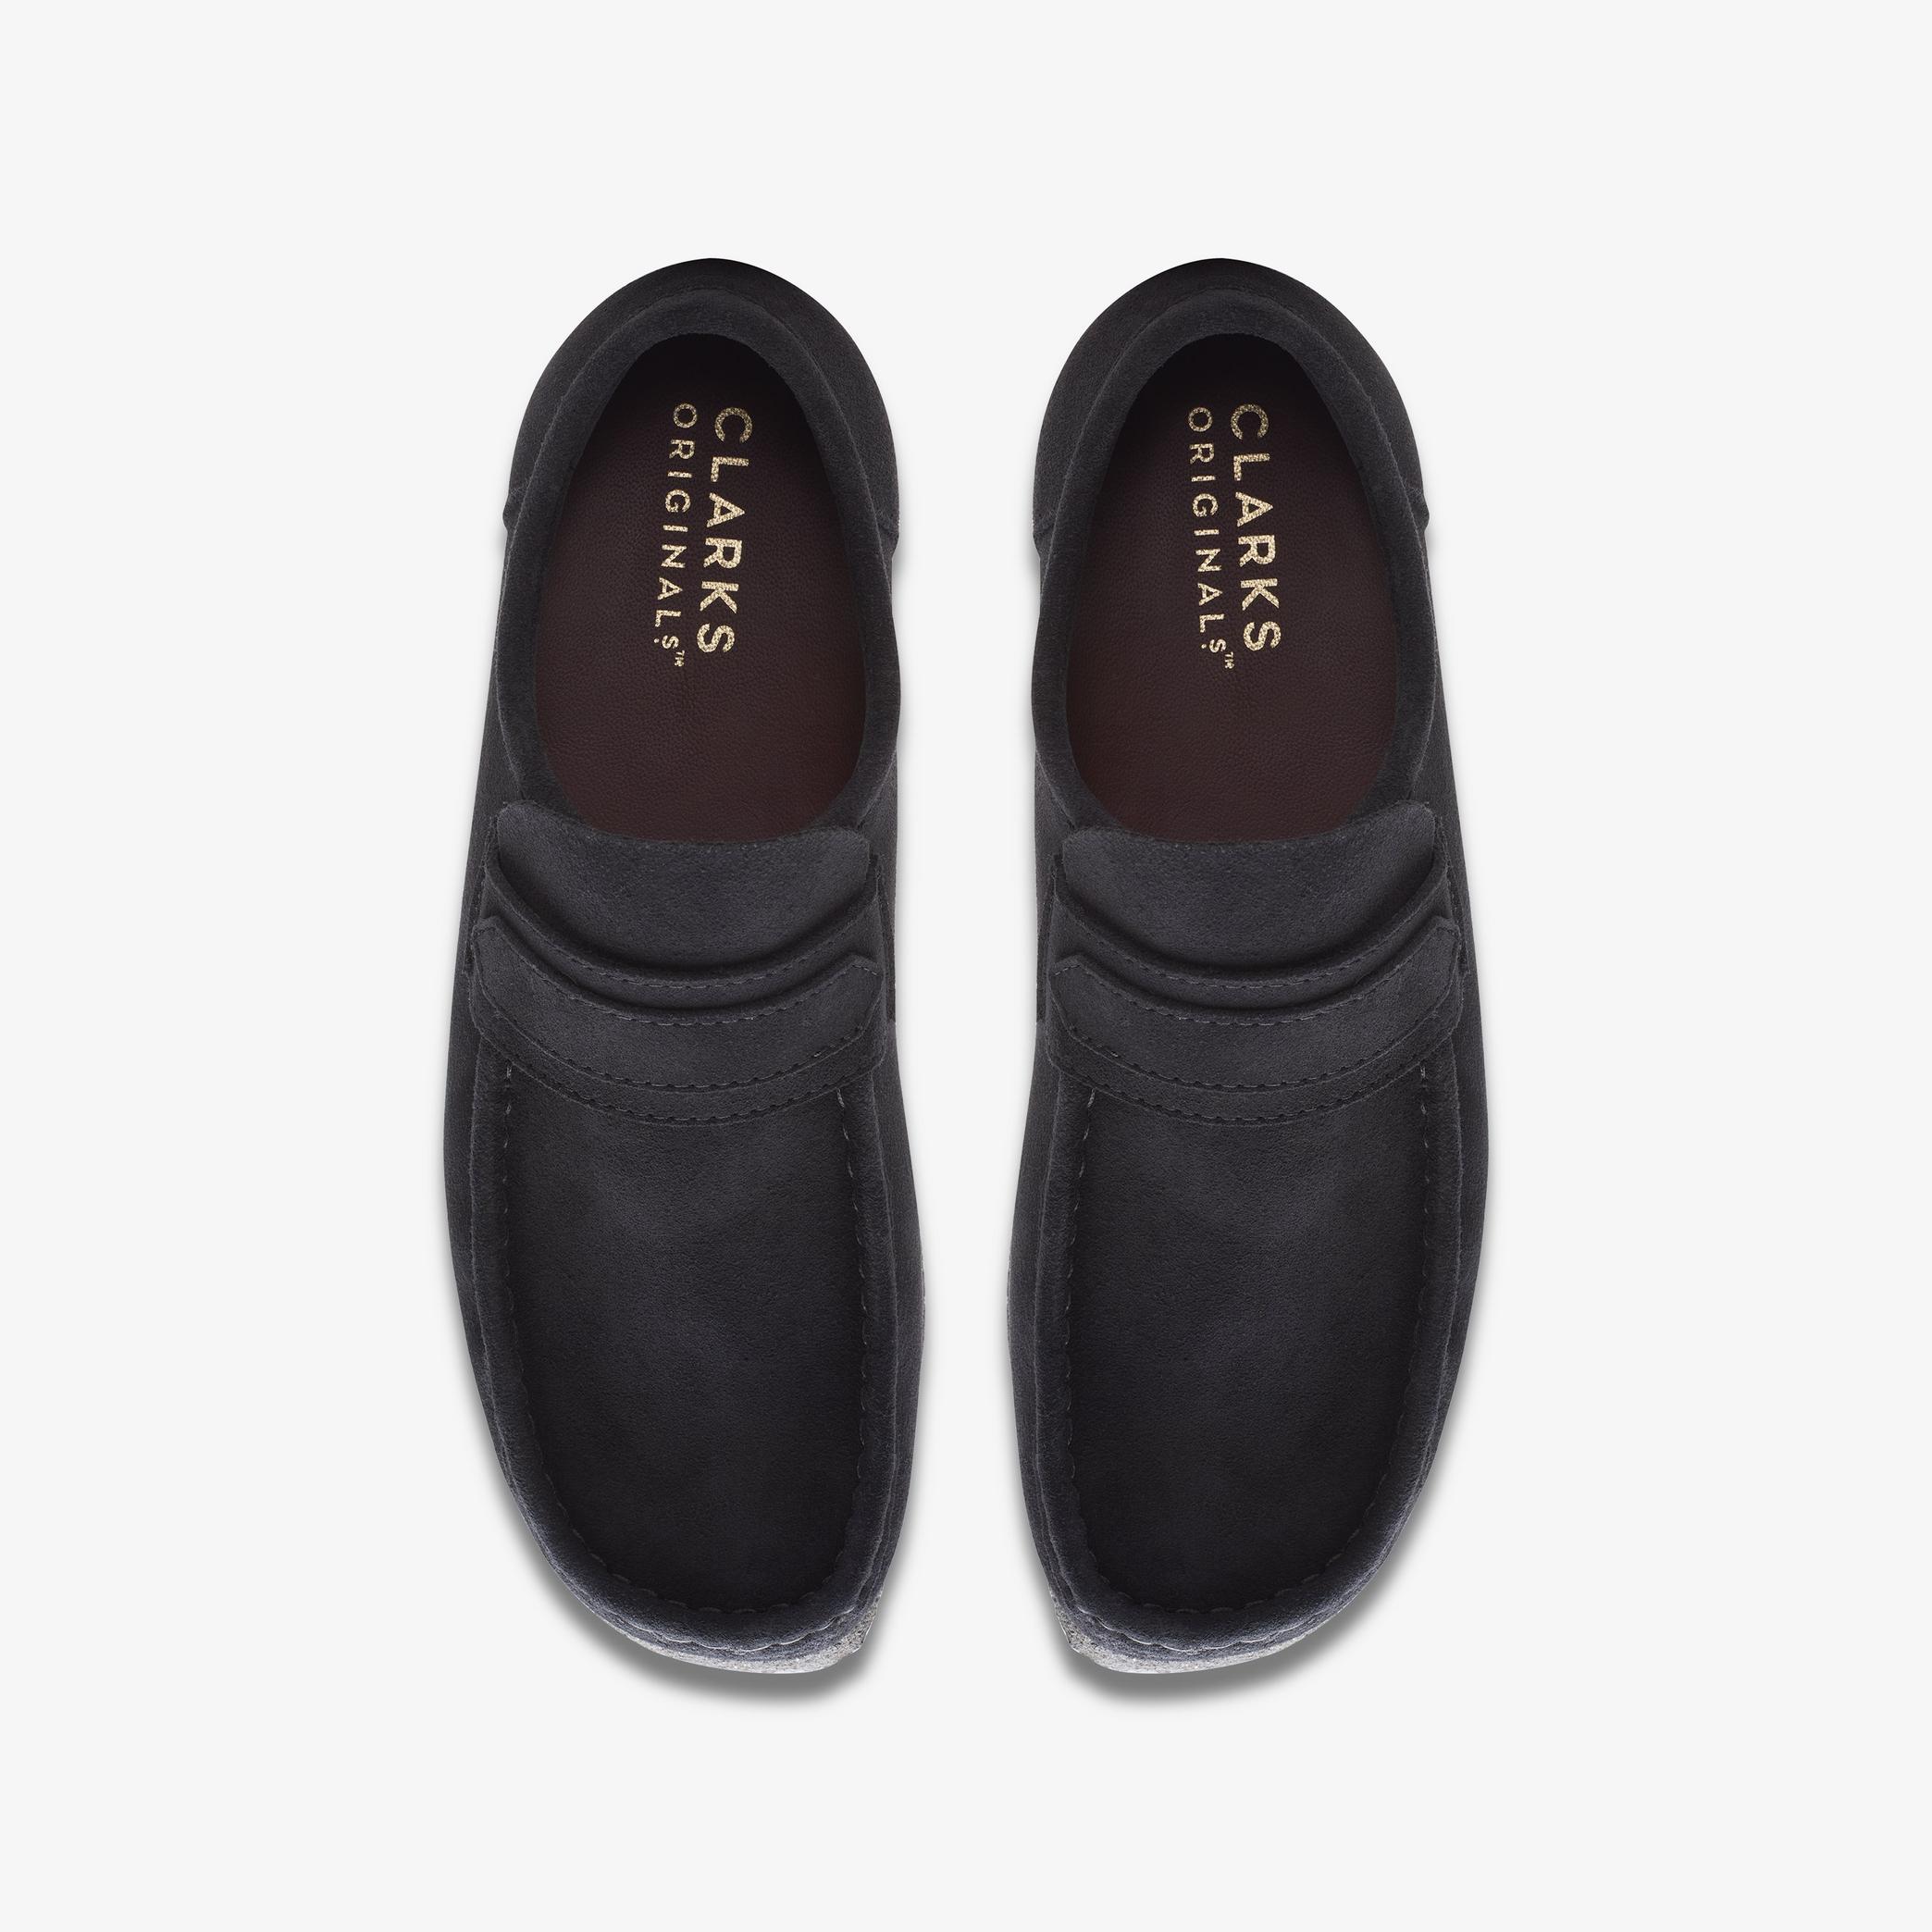 Wallabee Loafer Black Suede Loafers, view 6 of 6